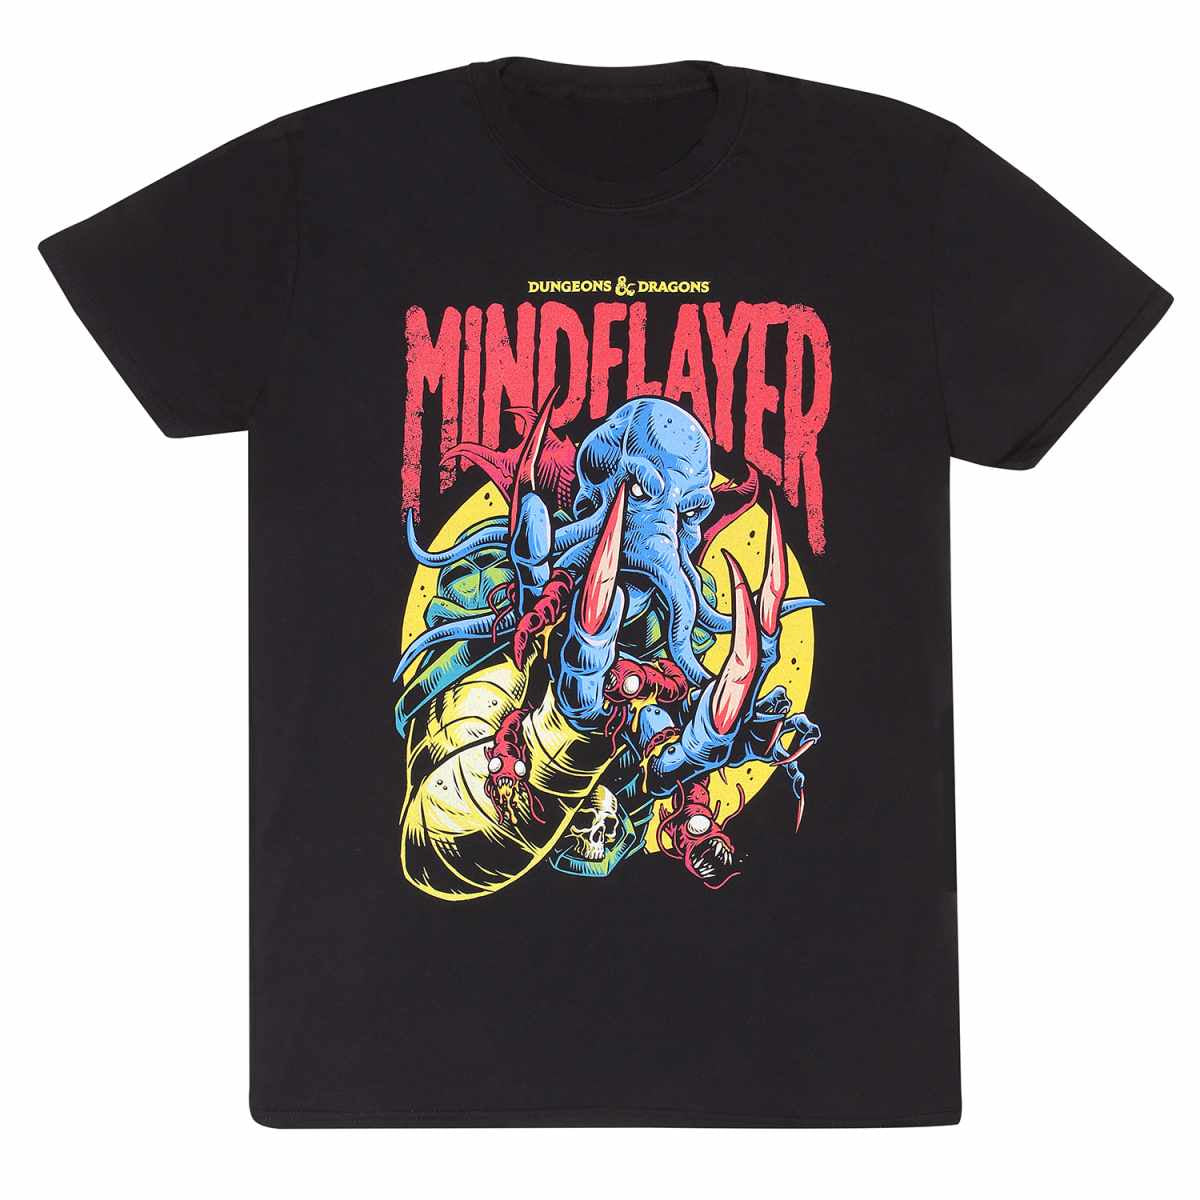 DUNGEONS & DRAGONS - Mindflayer Colour Pop T-Shirt